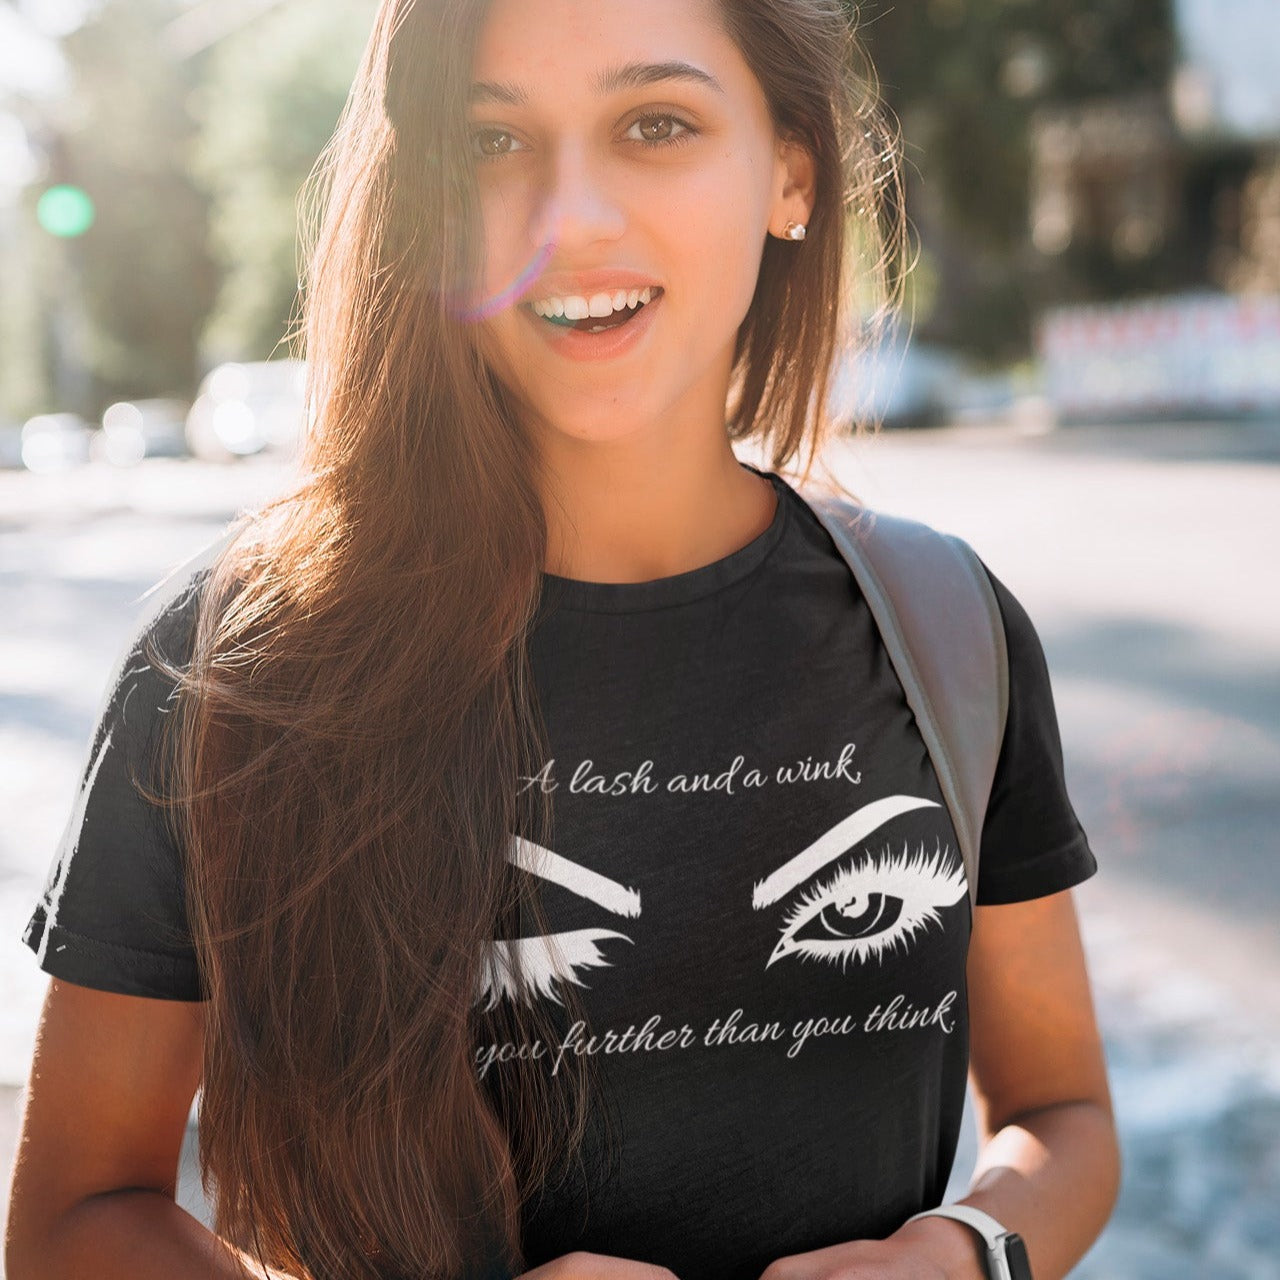 a-lash-and-a-wink-gets-you-further-than-you-think-black-t-shirt-womens-lashes-mockup-featuring-a-college-student-on-a-sunny-day